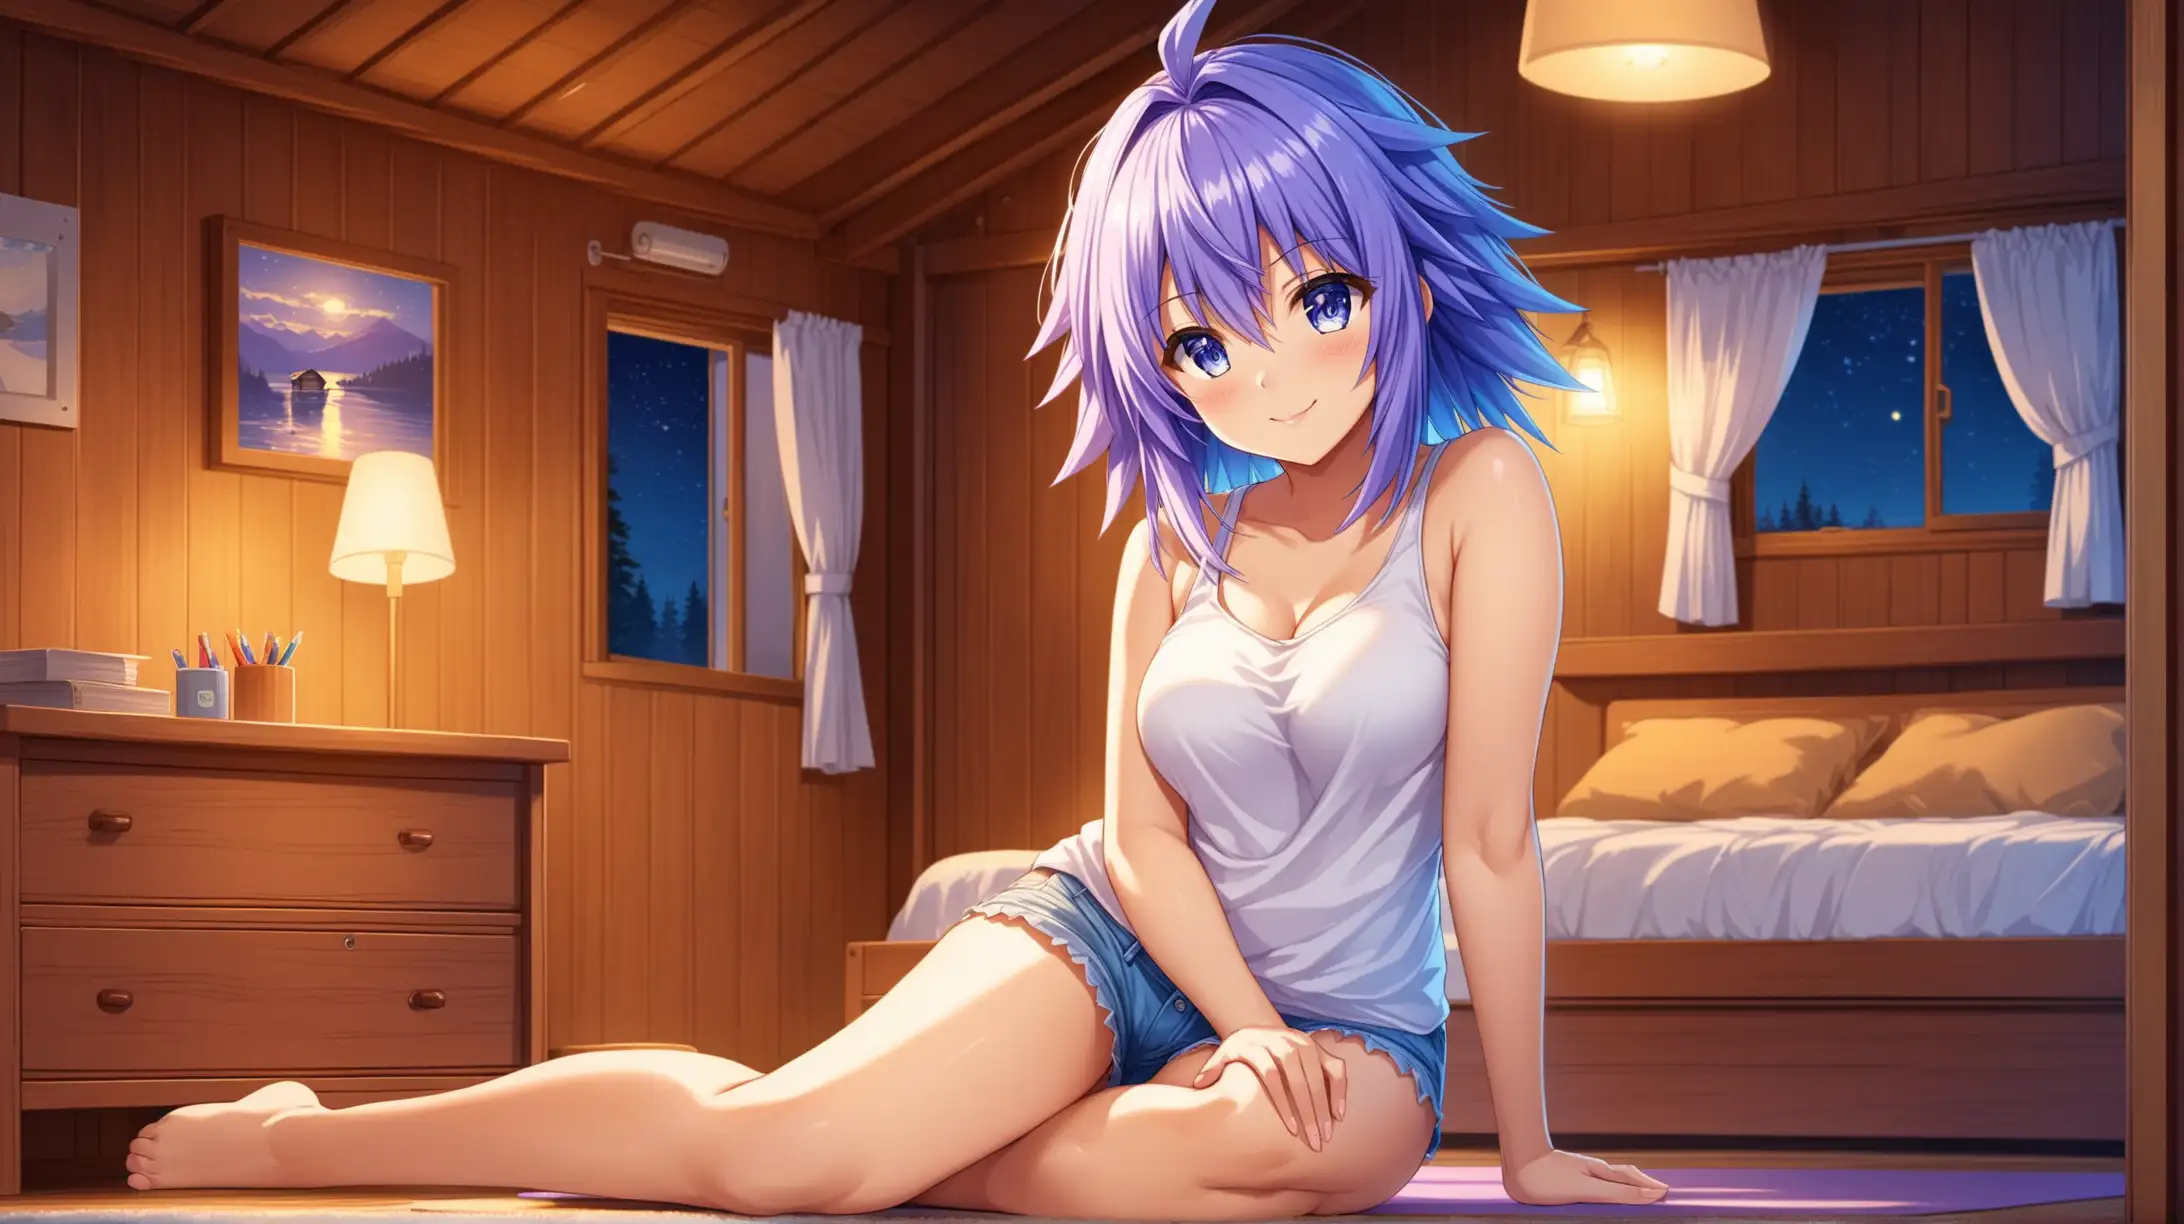 Draw the character Neptunia, high quality, indoors, cabin, ambient lighting, long shot, in a seductive pose, wearing a casual outfit, looking at the viewer with a loving smile